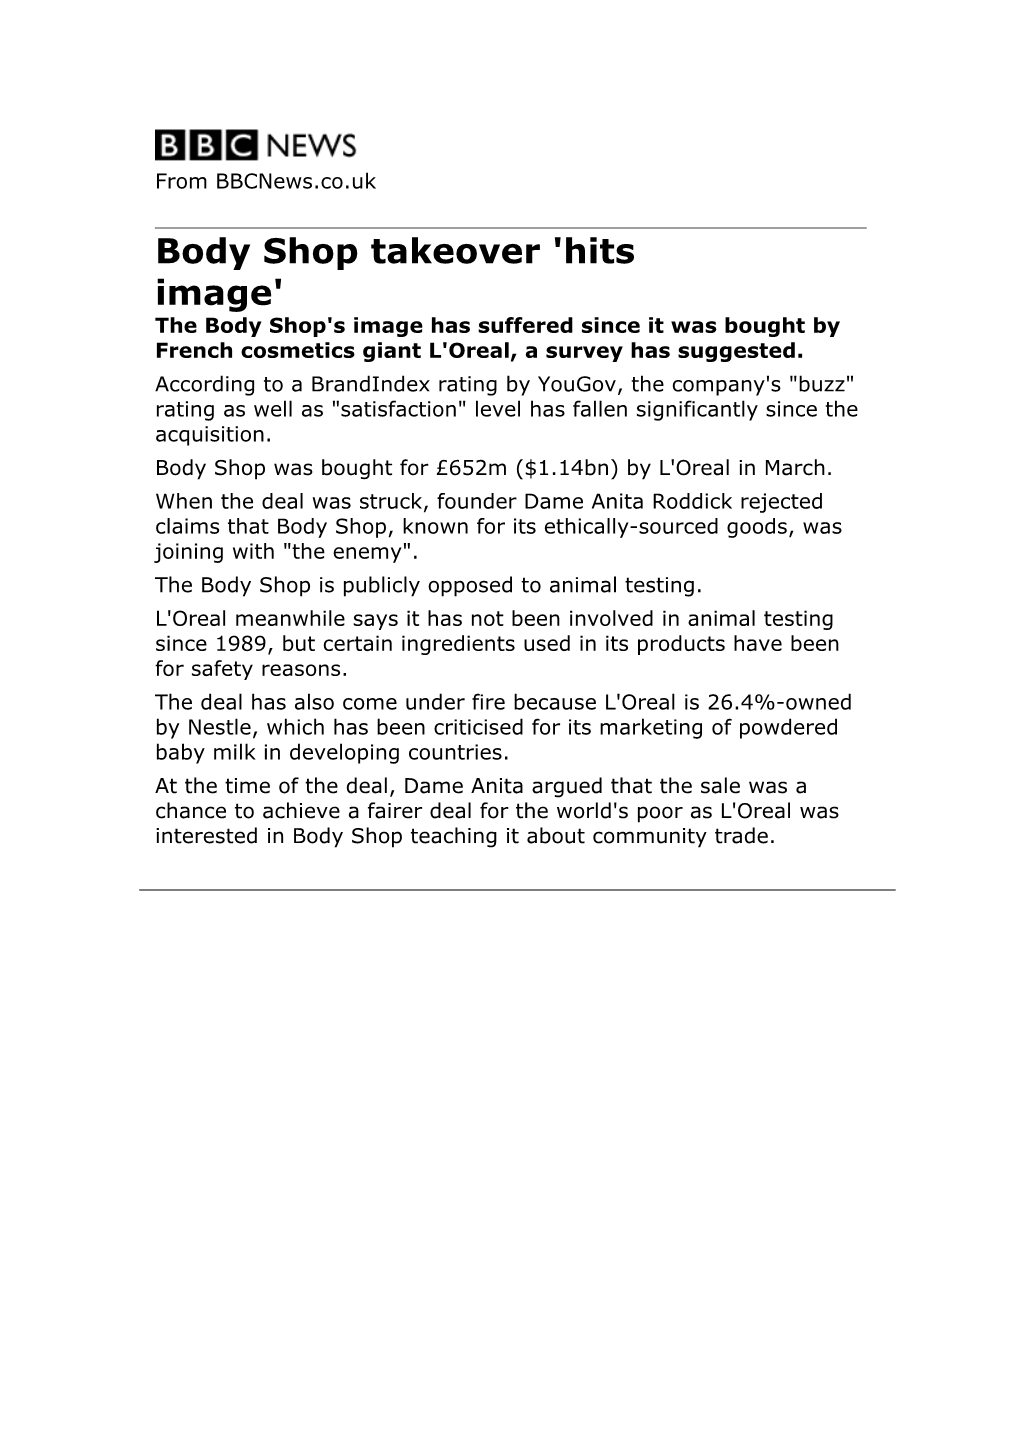 Body Shop Takeover 'Hits Image'